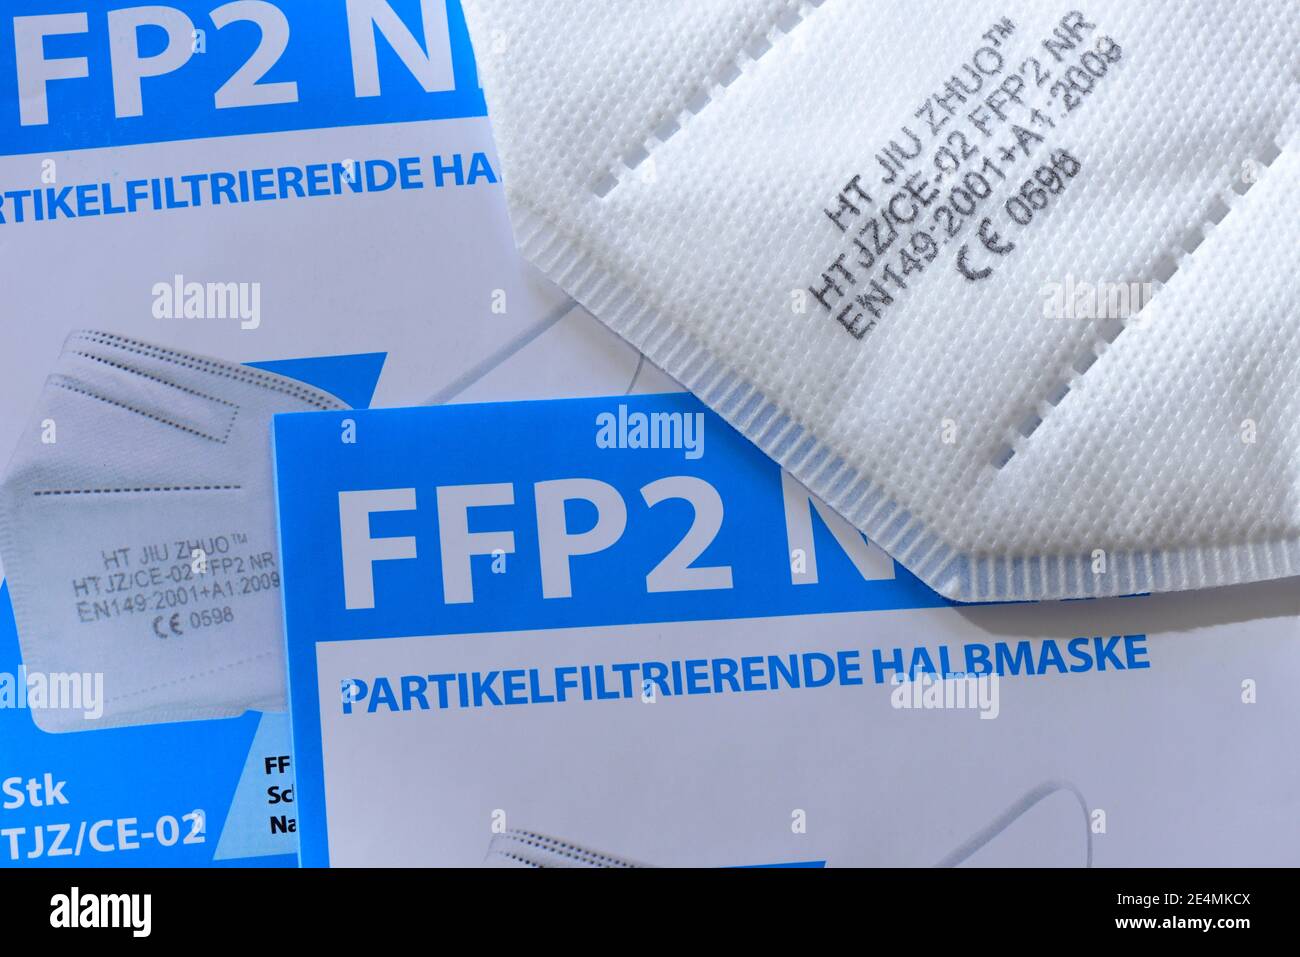 FFP2 particle filtering half mask Stock Photo